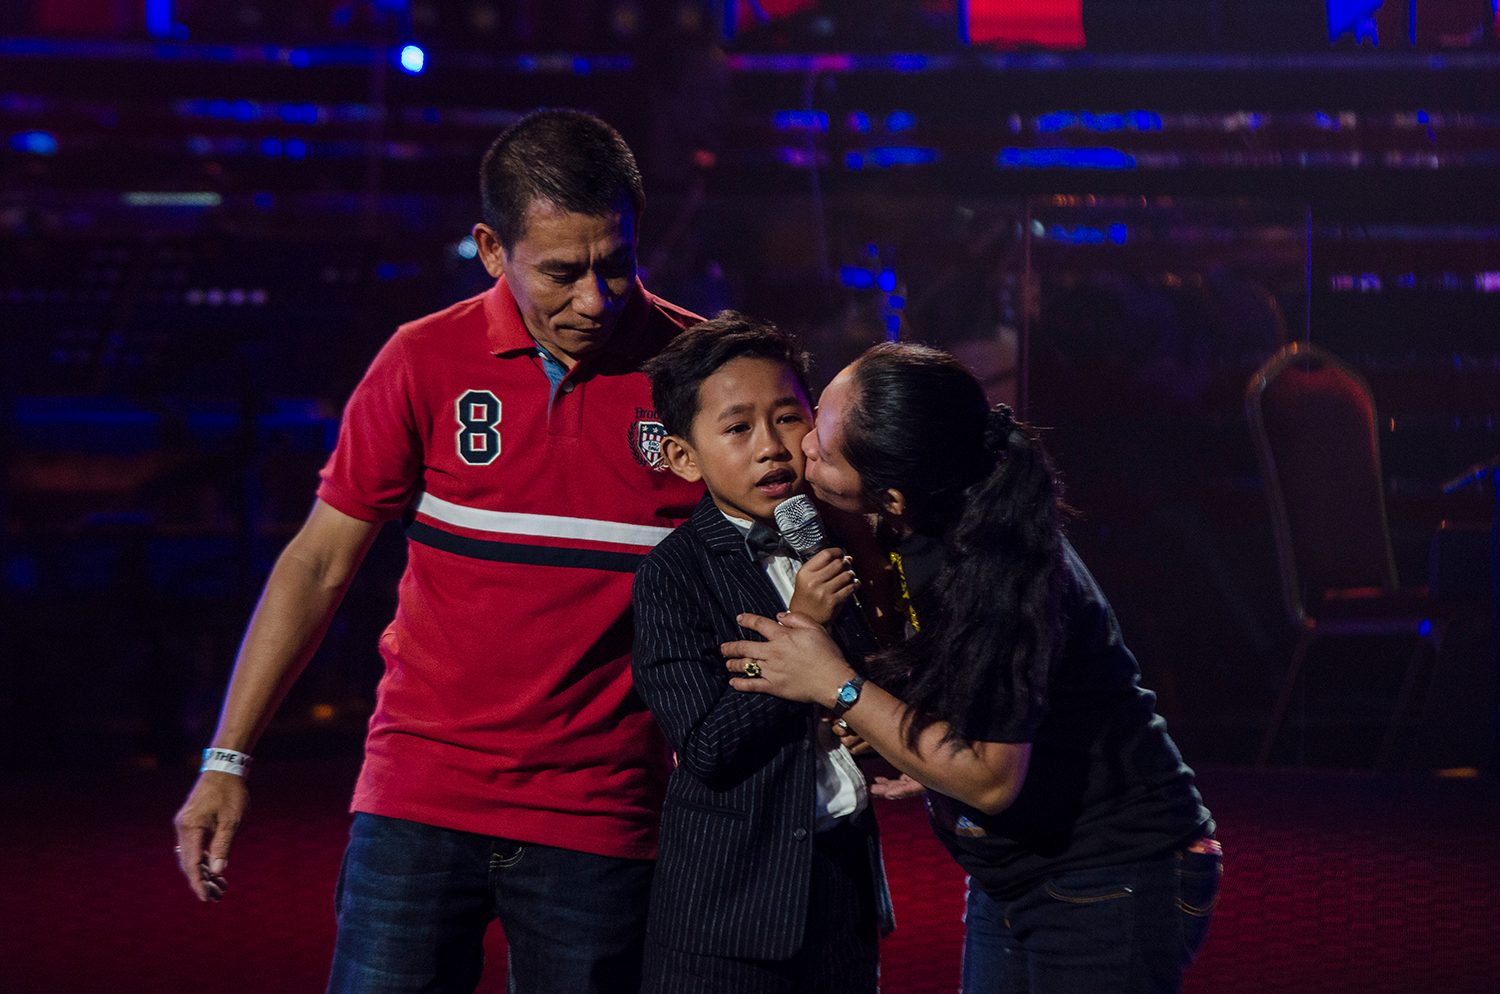 Joshua with his parents onstage Photo by Rob Reyes/Rappler 